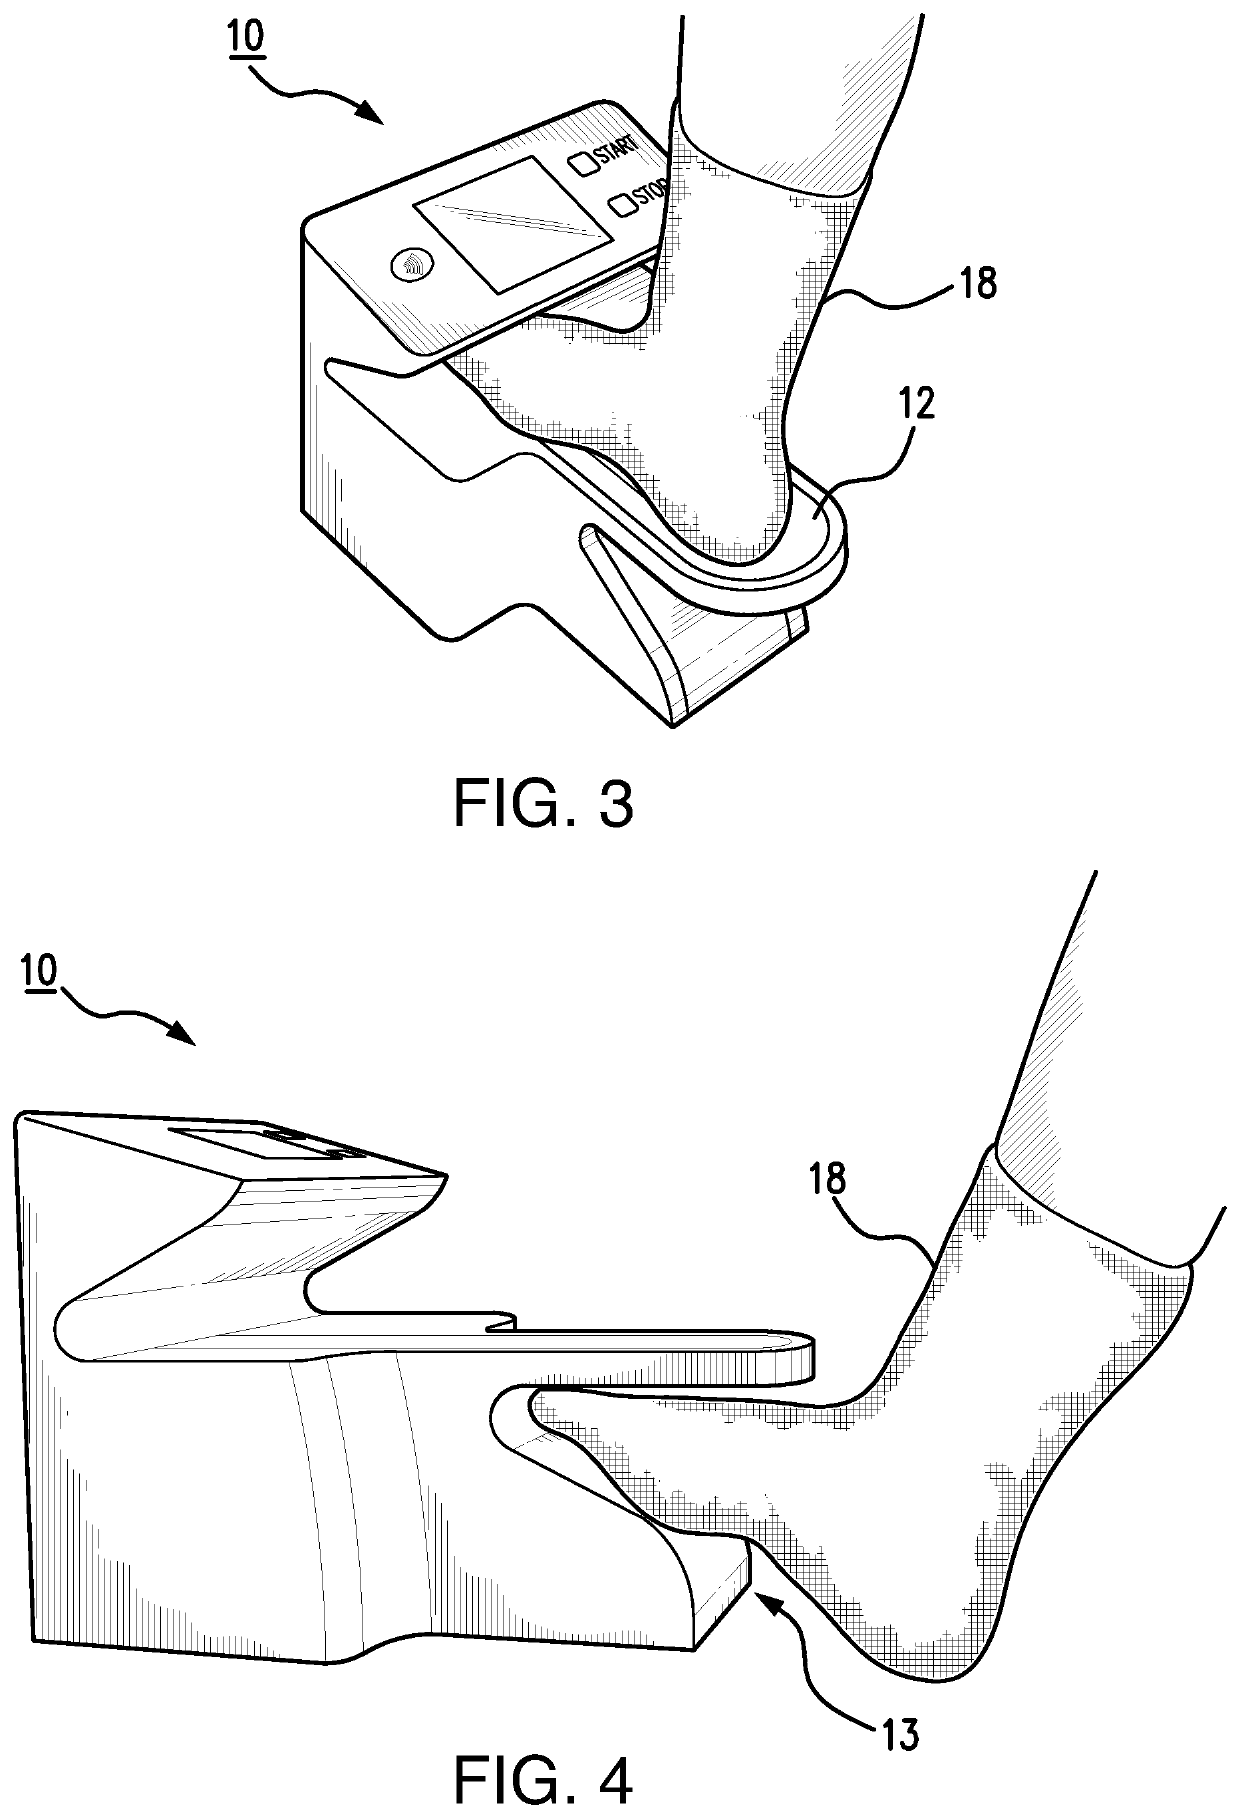 Integrated magnetic pulsation device for the treatment of foot pain